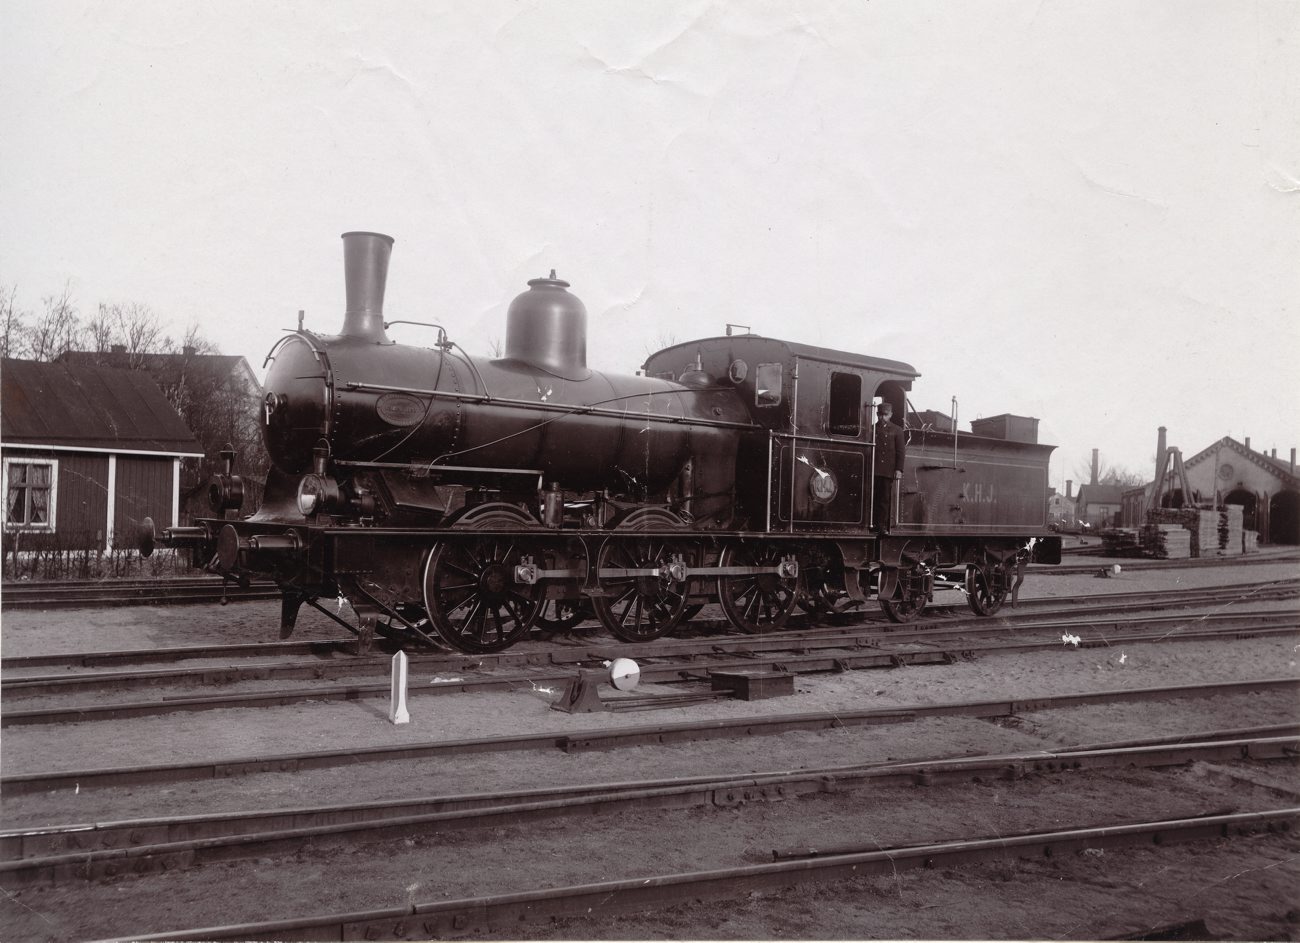 a black and white image of an old train on train tracks